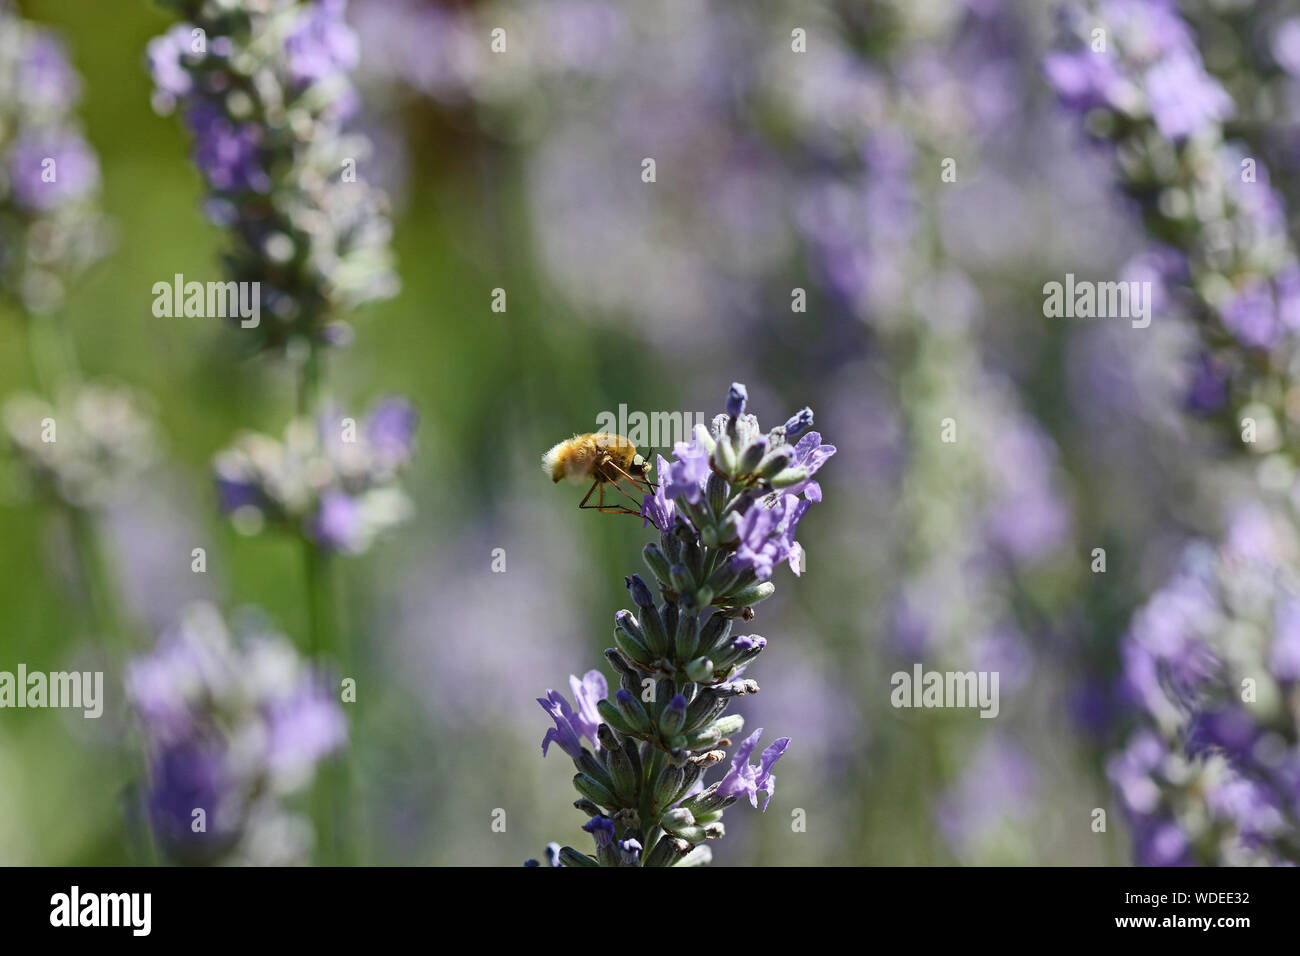 strange furry bee called a bee fly, beefly or bee-fly Latin name bombylius major feeding on lavender Latin lavandula flower in Italy Stock Photo